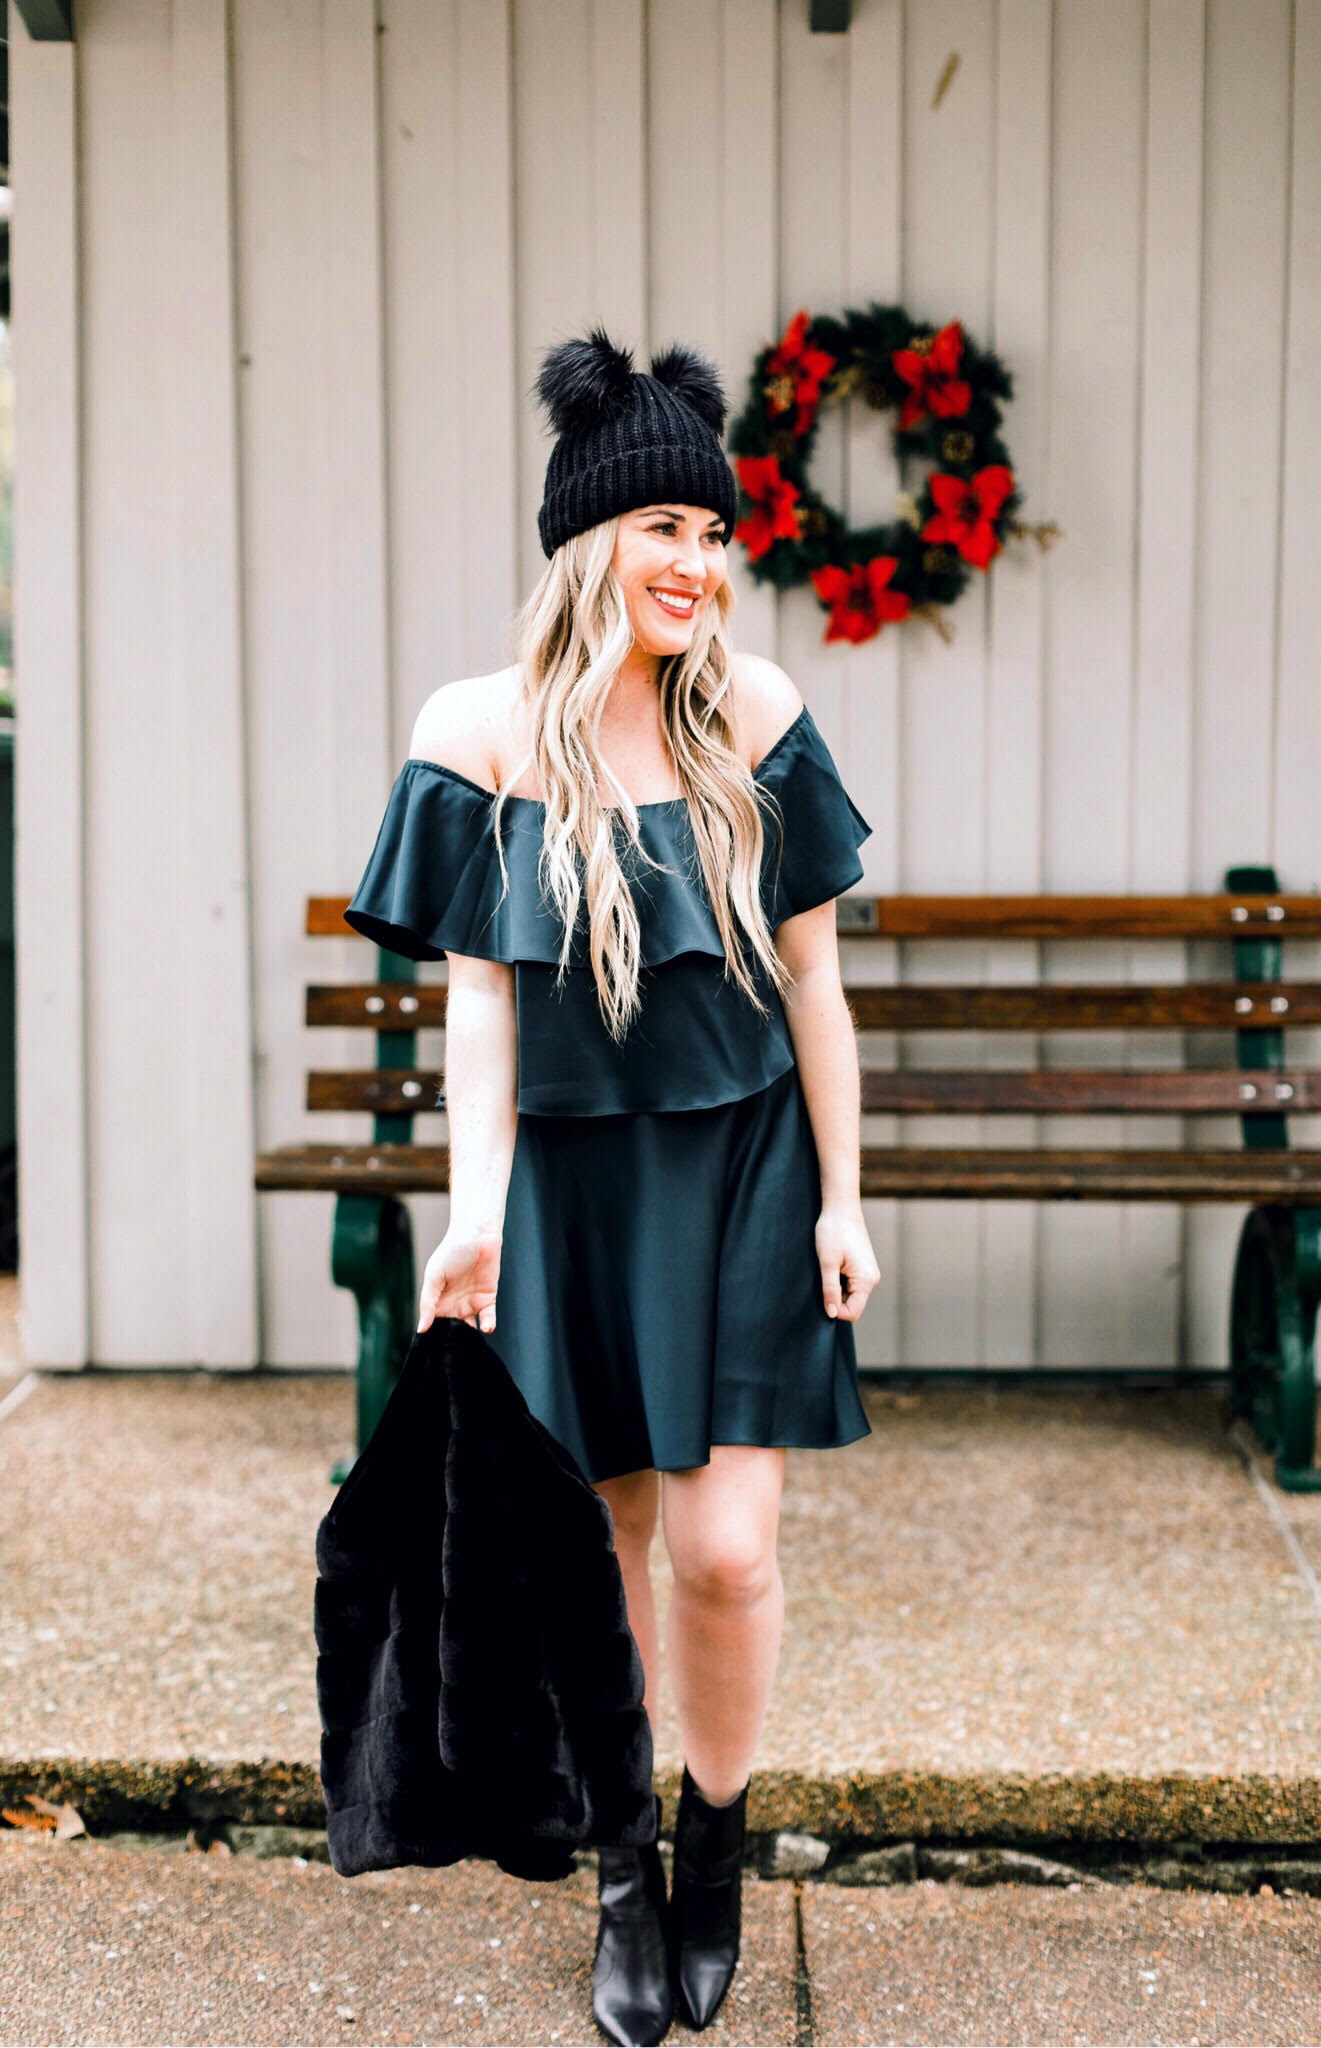 Christmas style featured by top fashion blog, Walking in Memphis in High Heels: image of a woman wearing an Eliza J dress, Sole Society sock booties and an ASOS Pom pom beanie